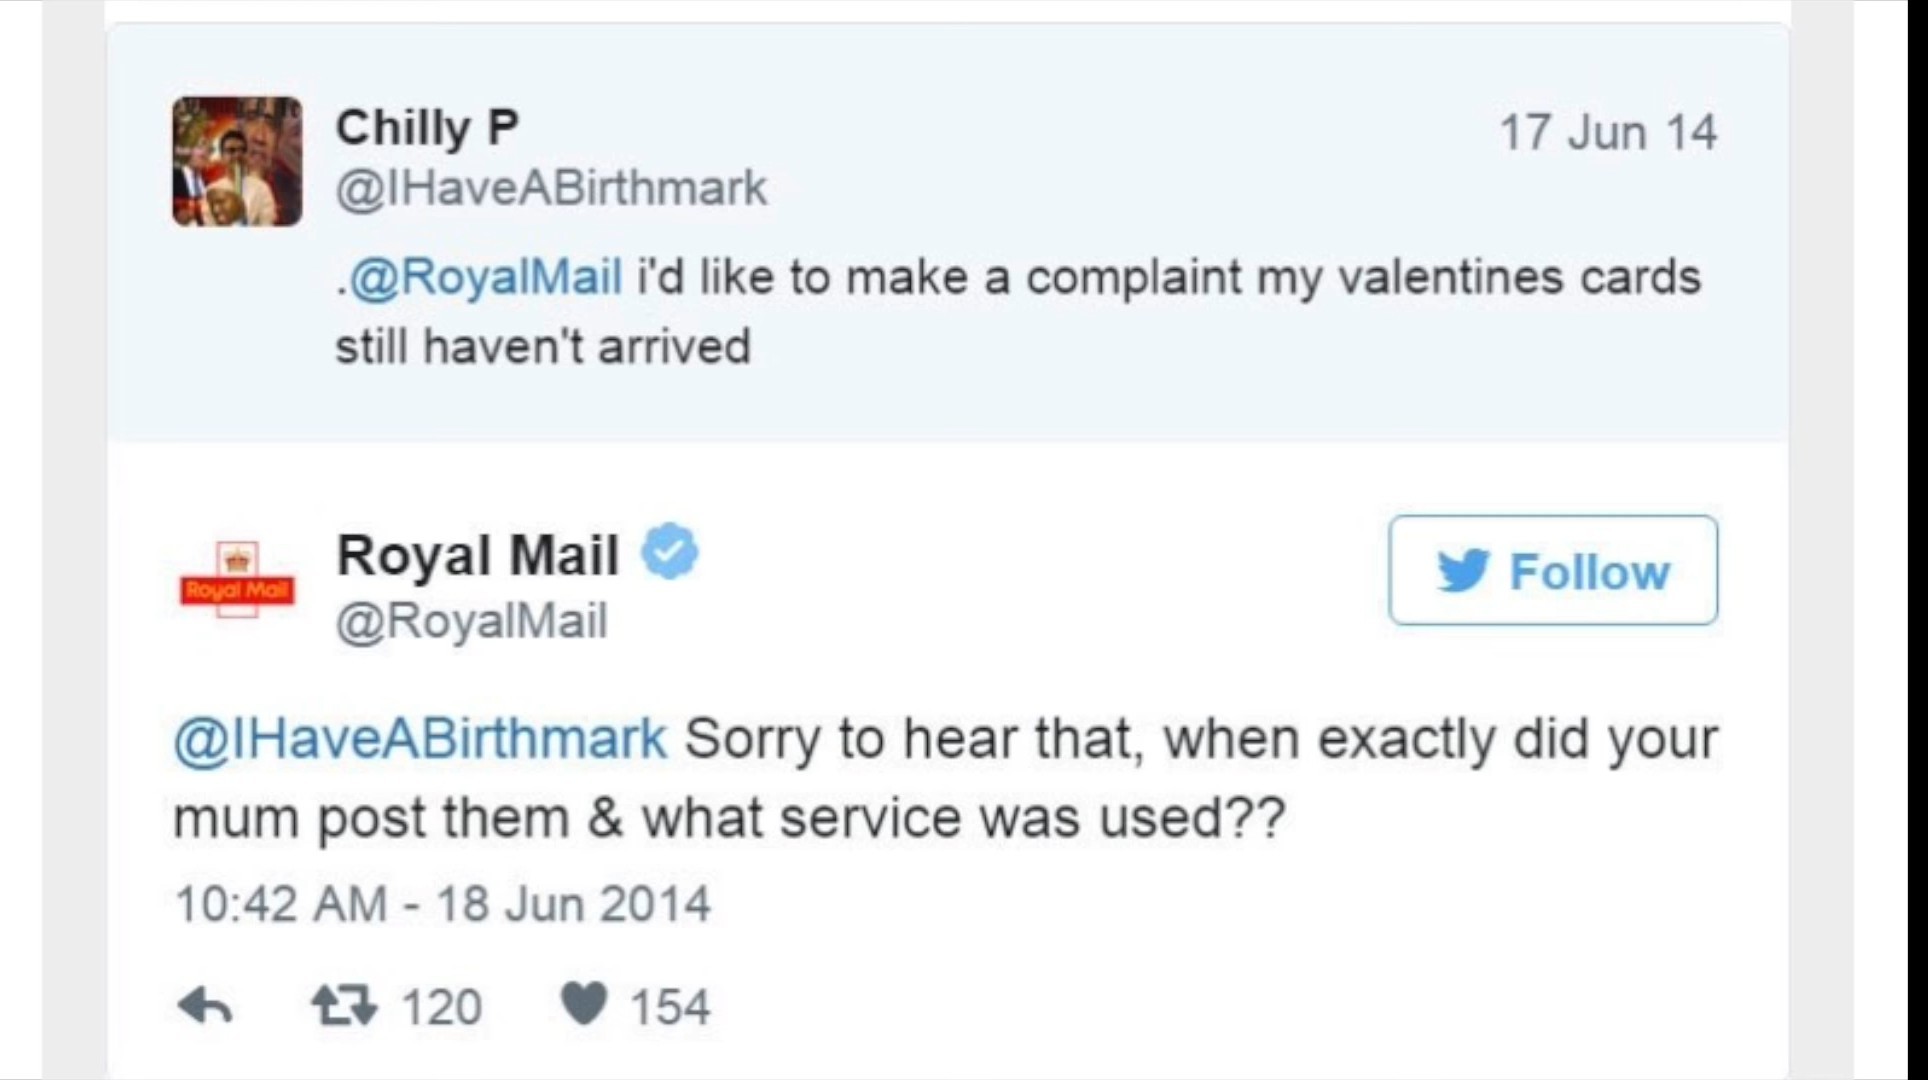 He just got roasted by a mail company... - meme